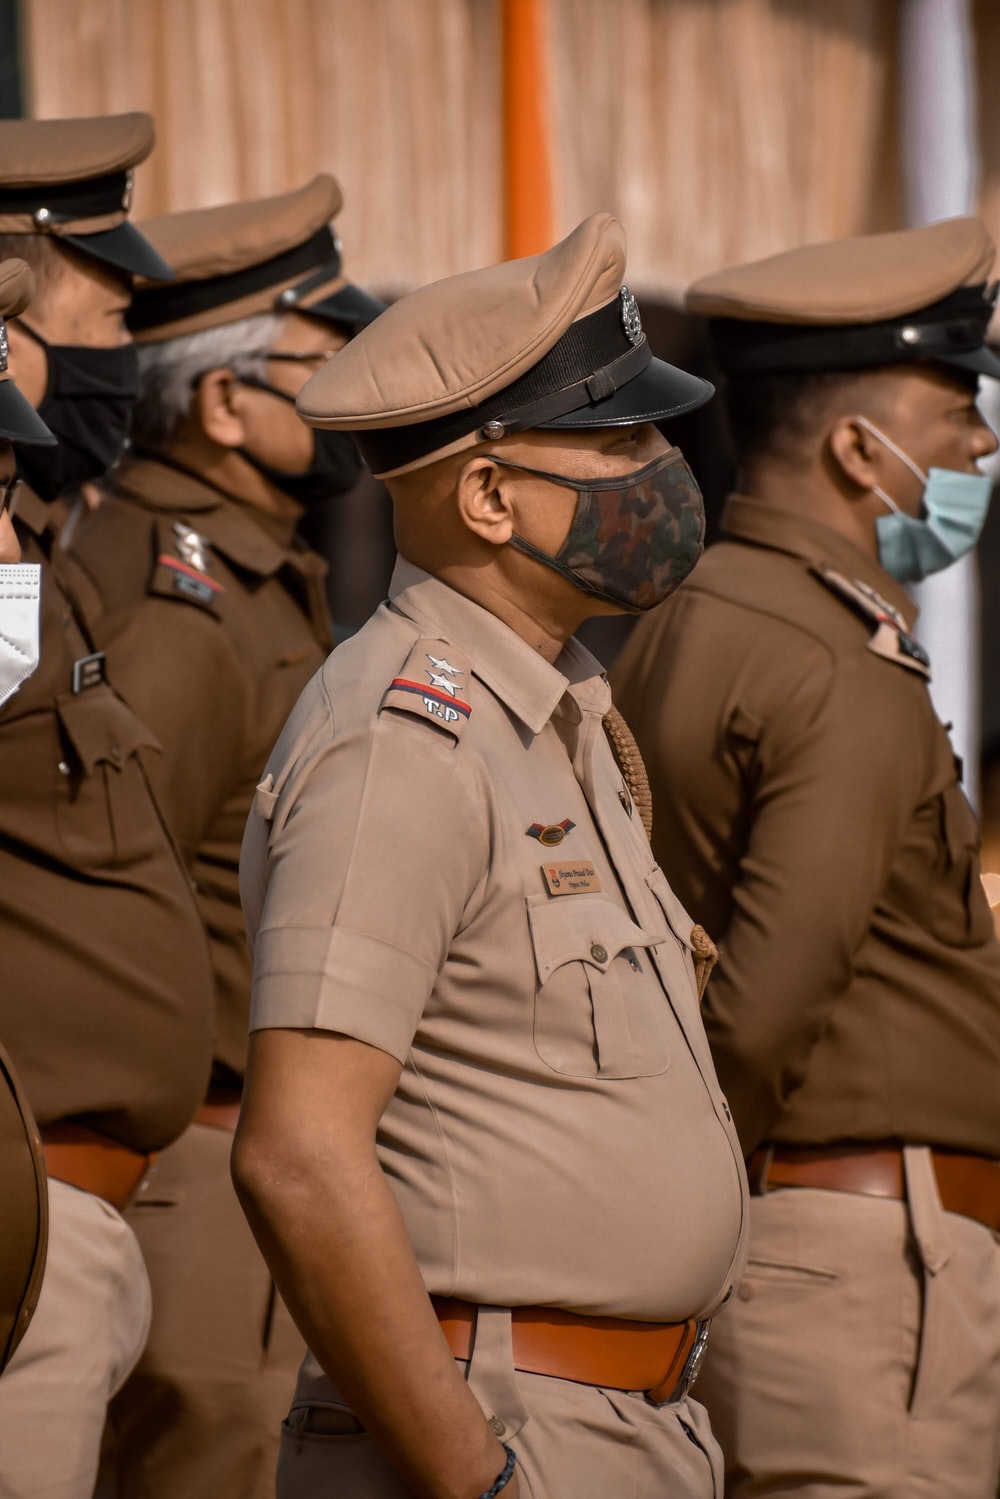 India Police Picture. Download Free Image